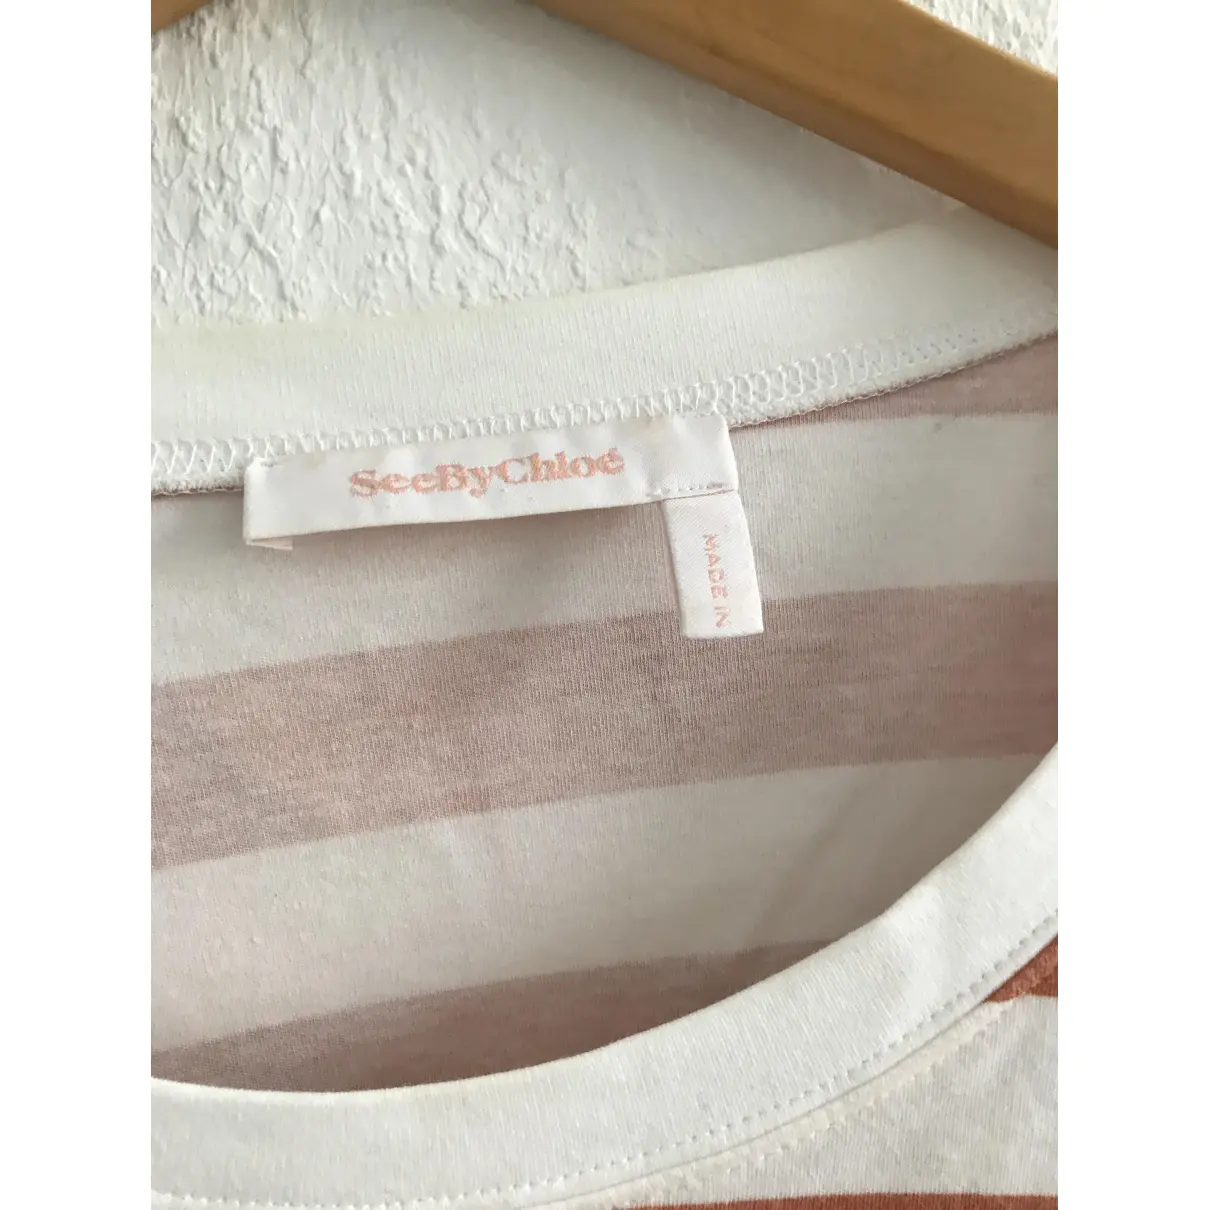 Buy See by Chloé Orange Cotton Top online